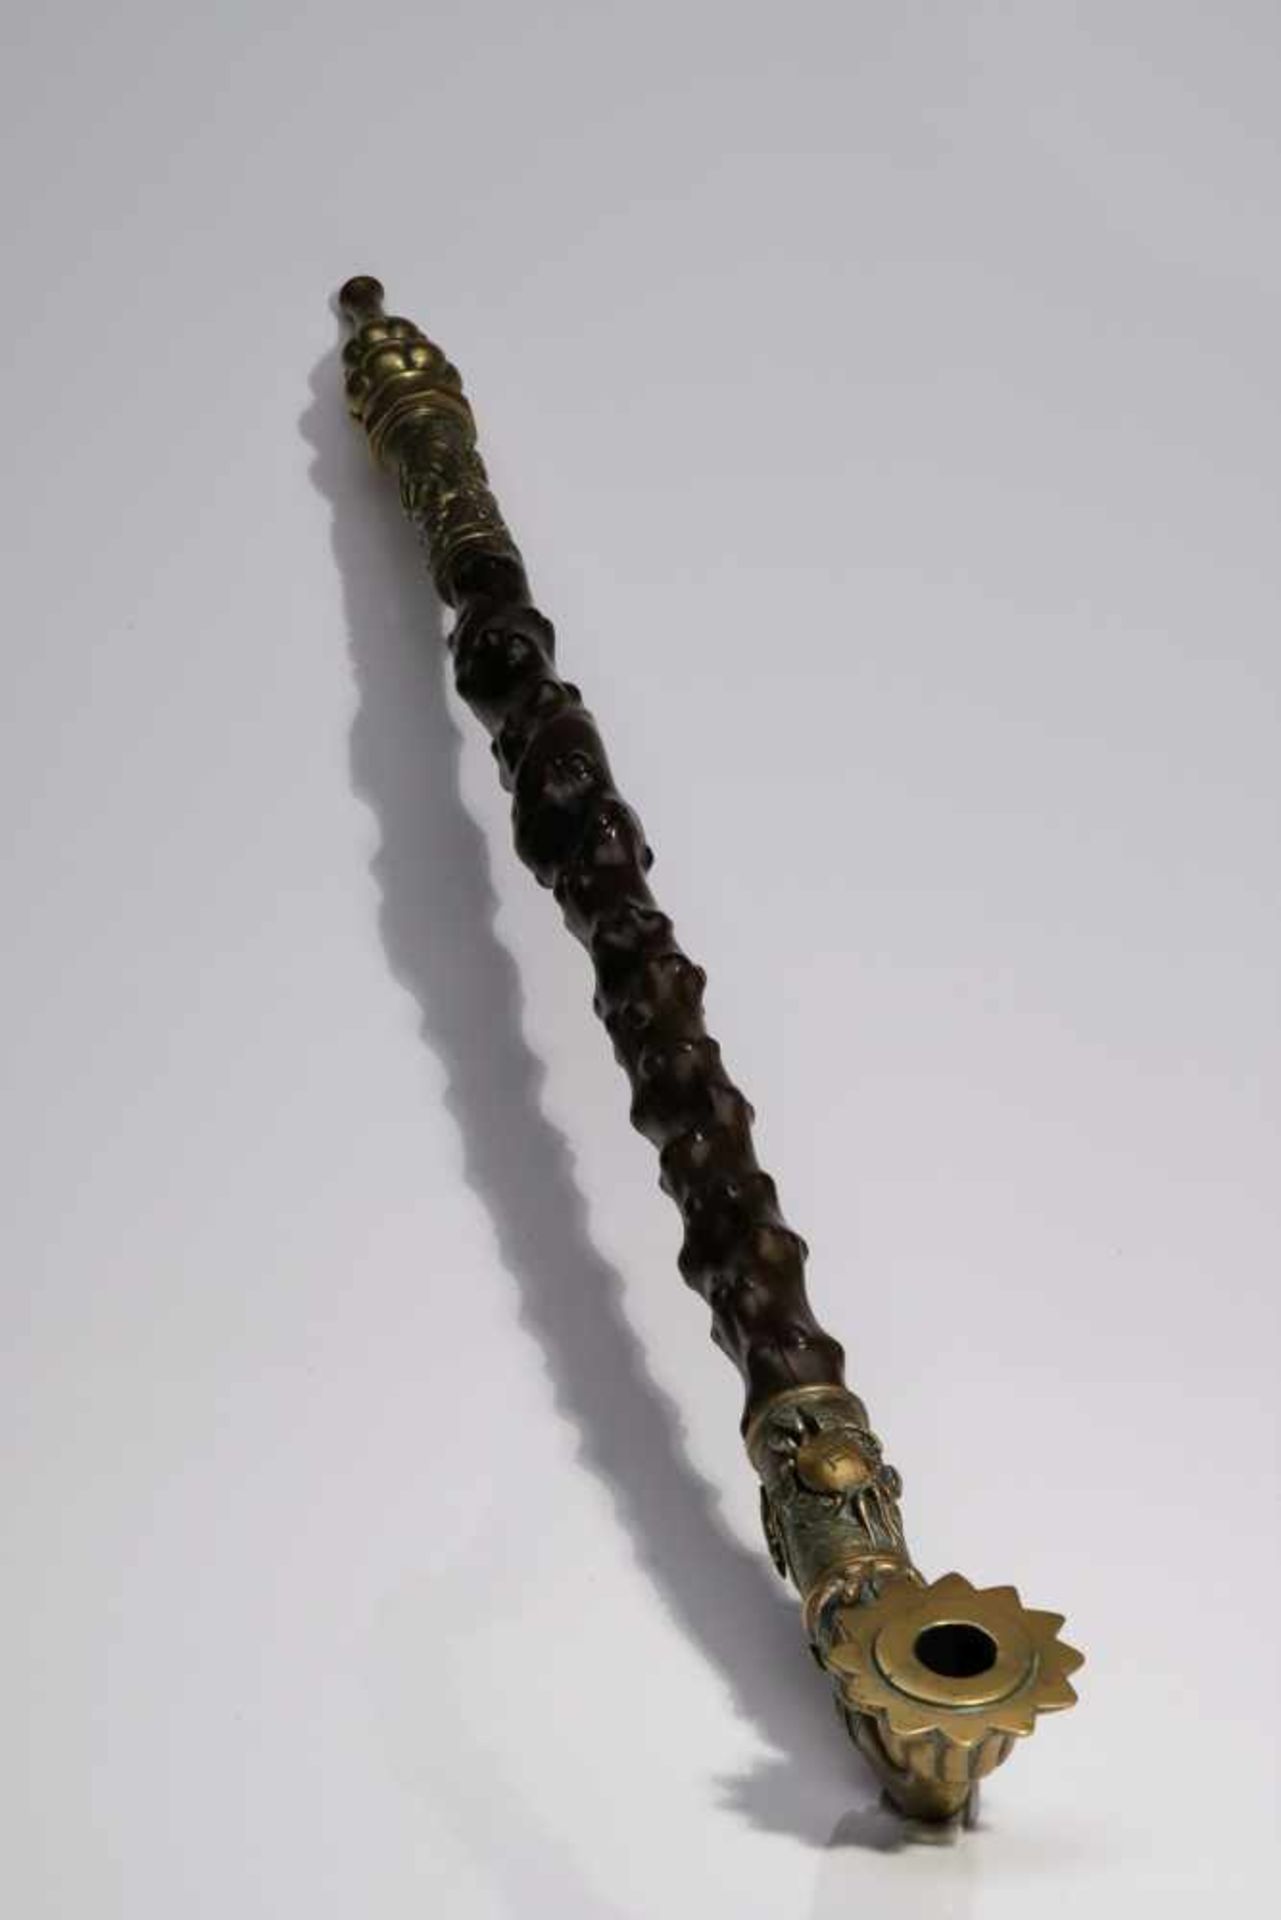 OPIUM PIPEwood and bronze,China, Qing Dynasty, Qianlong period,Size: 90 cmBowl and bit of this